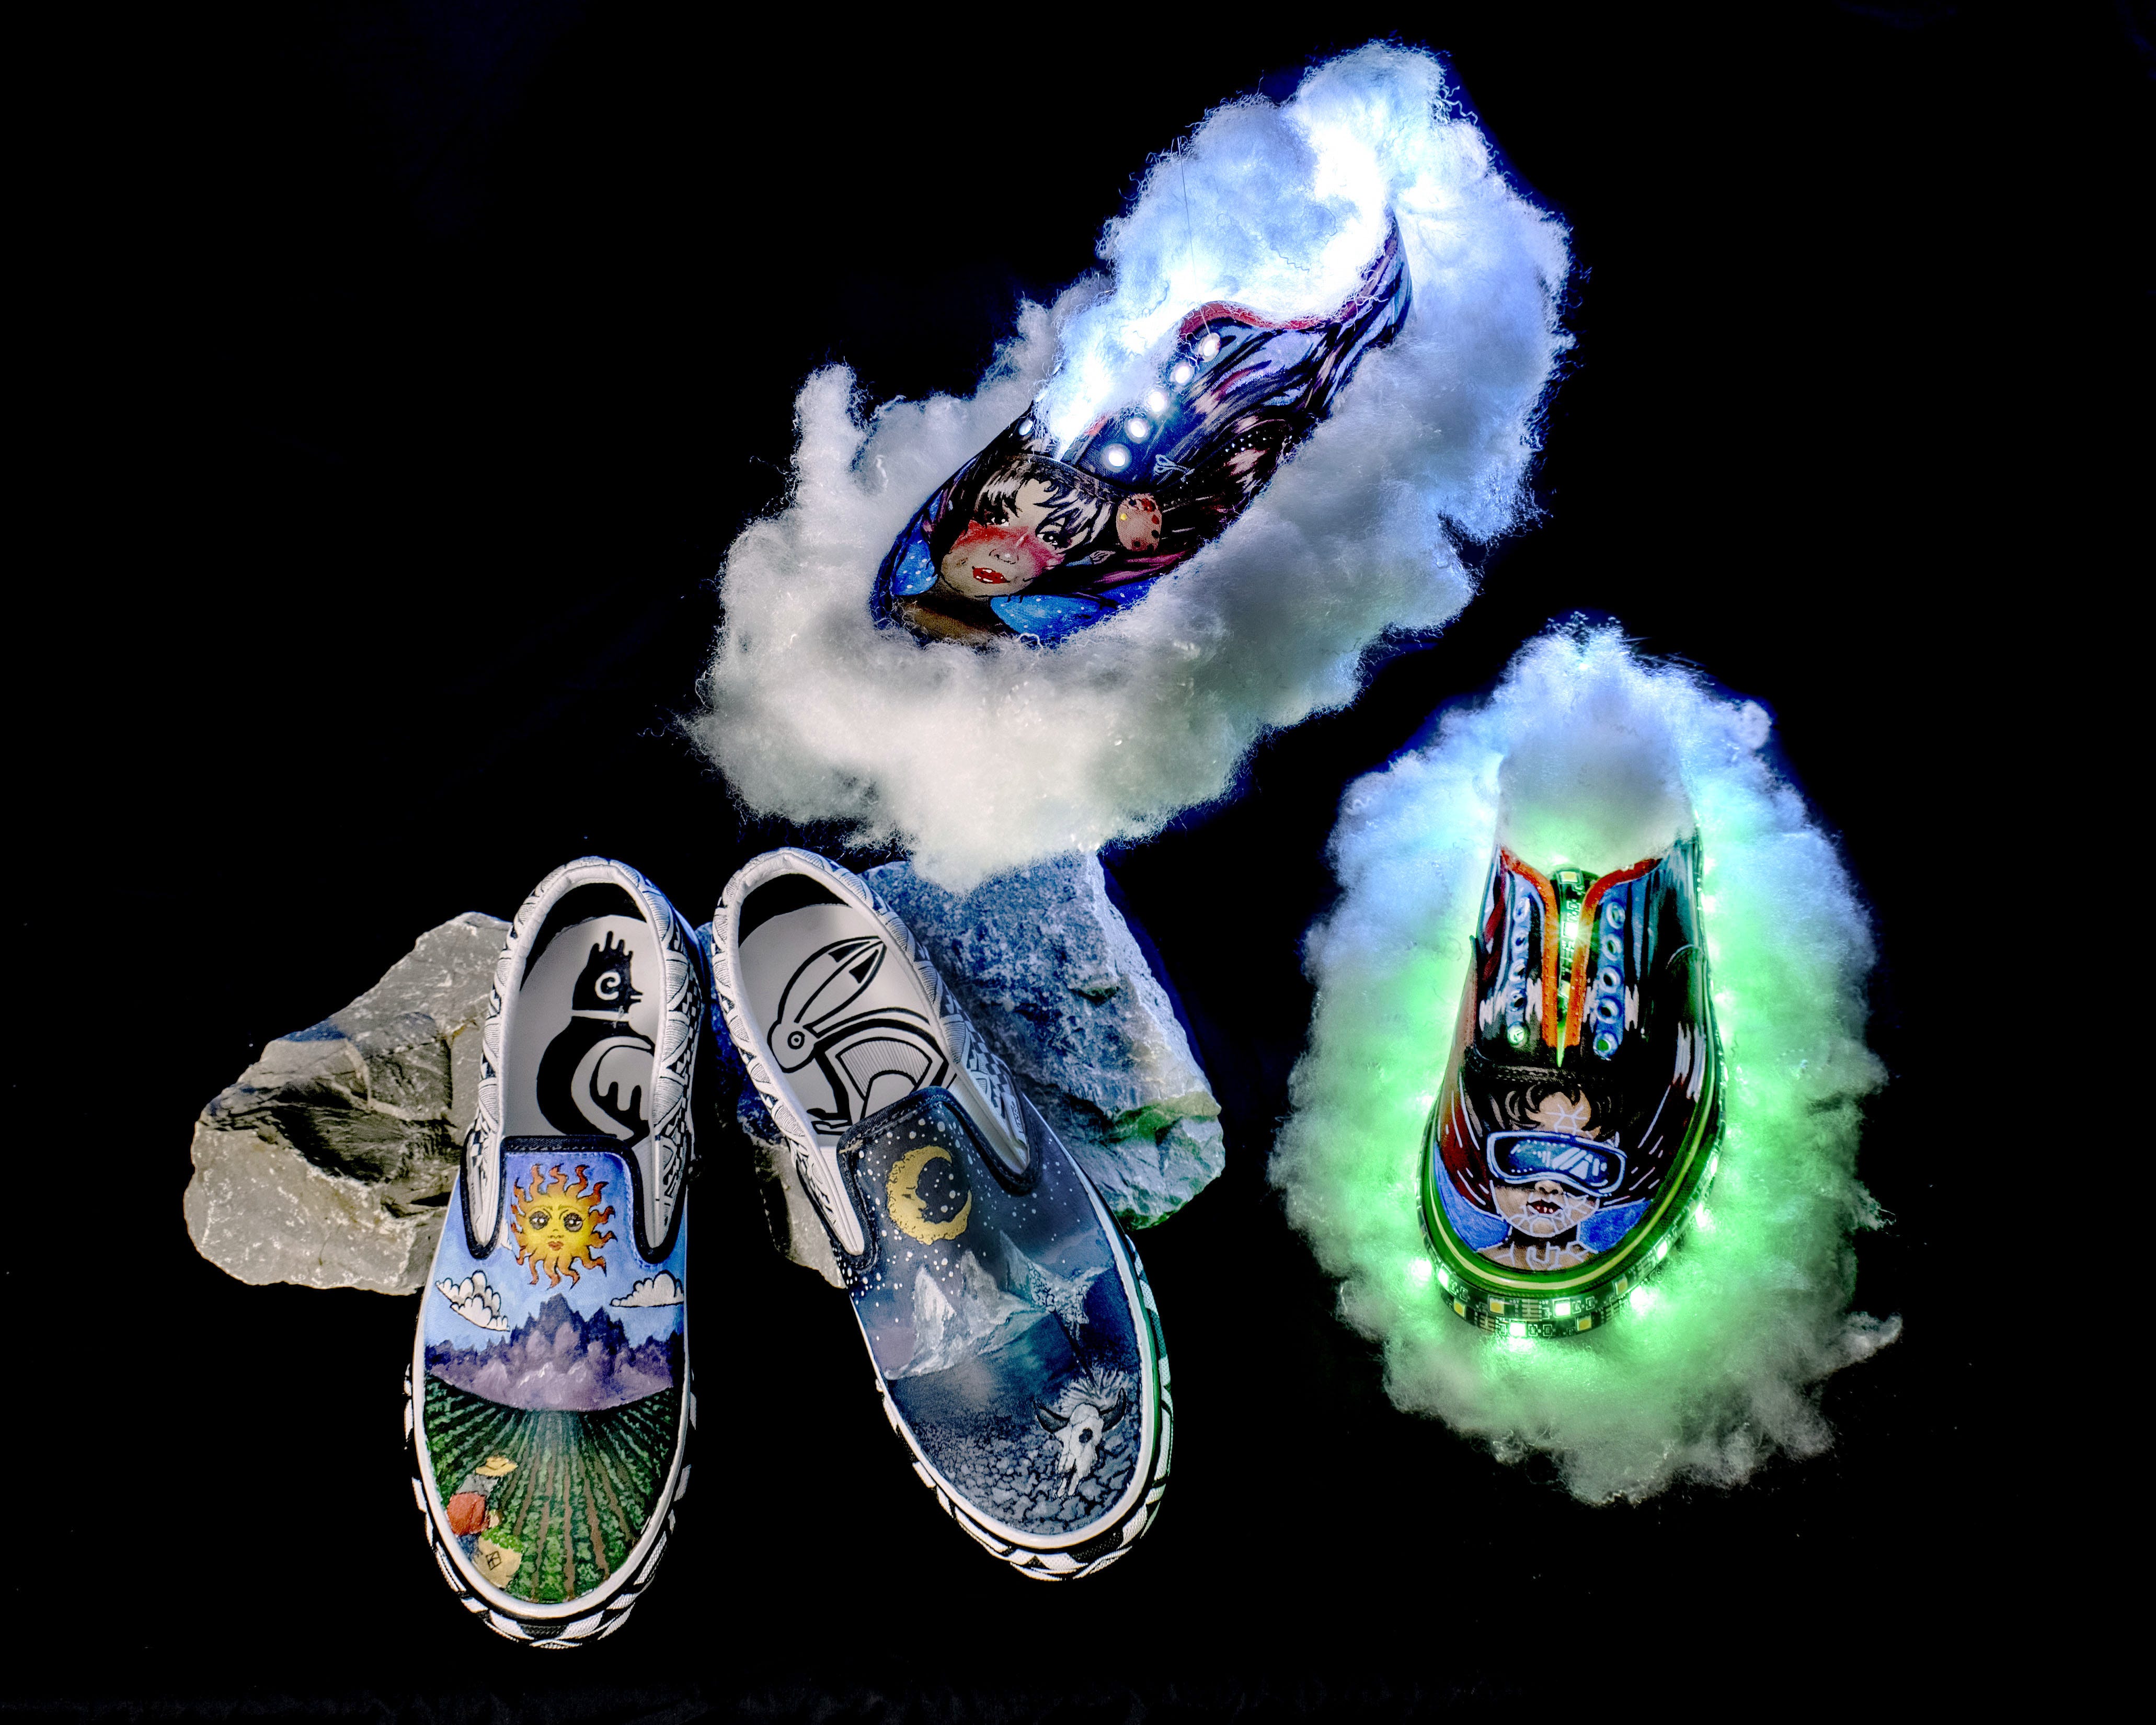 Cast your vote for art students in Vans Custom Culture Contest